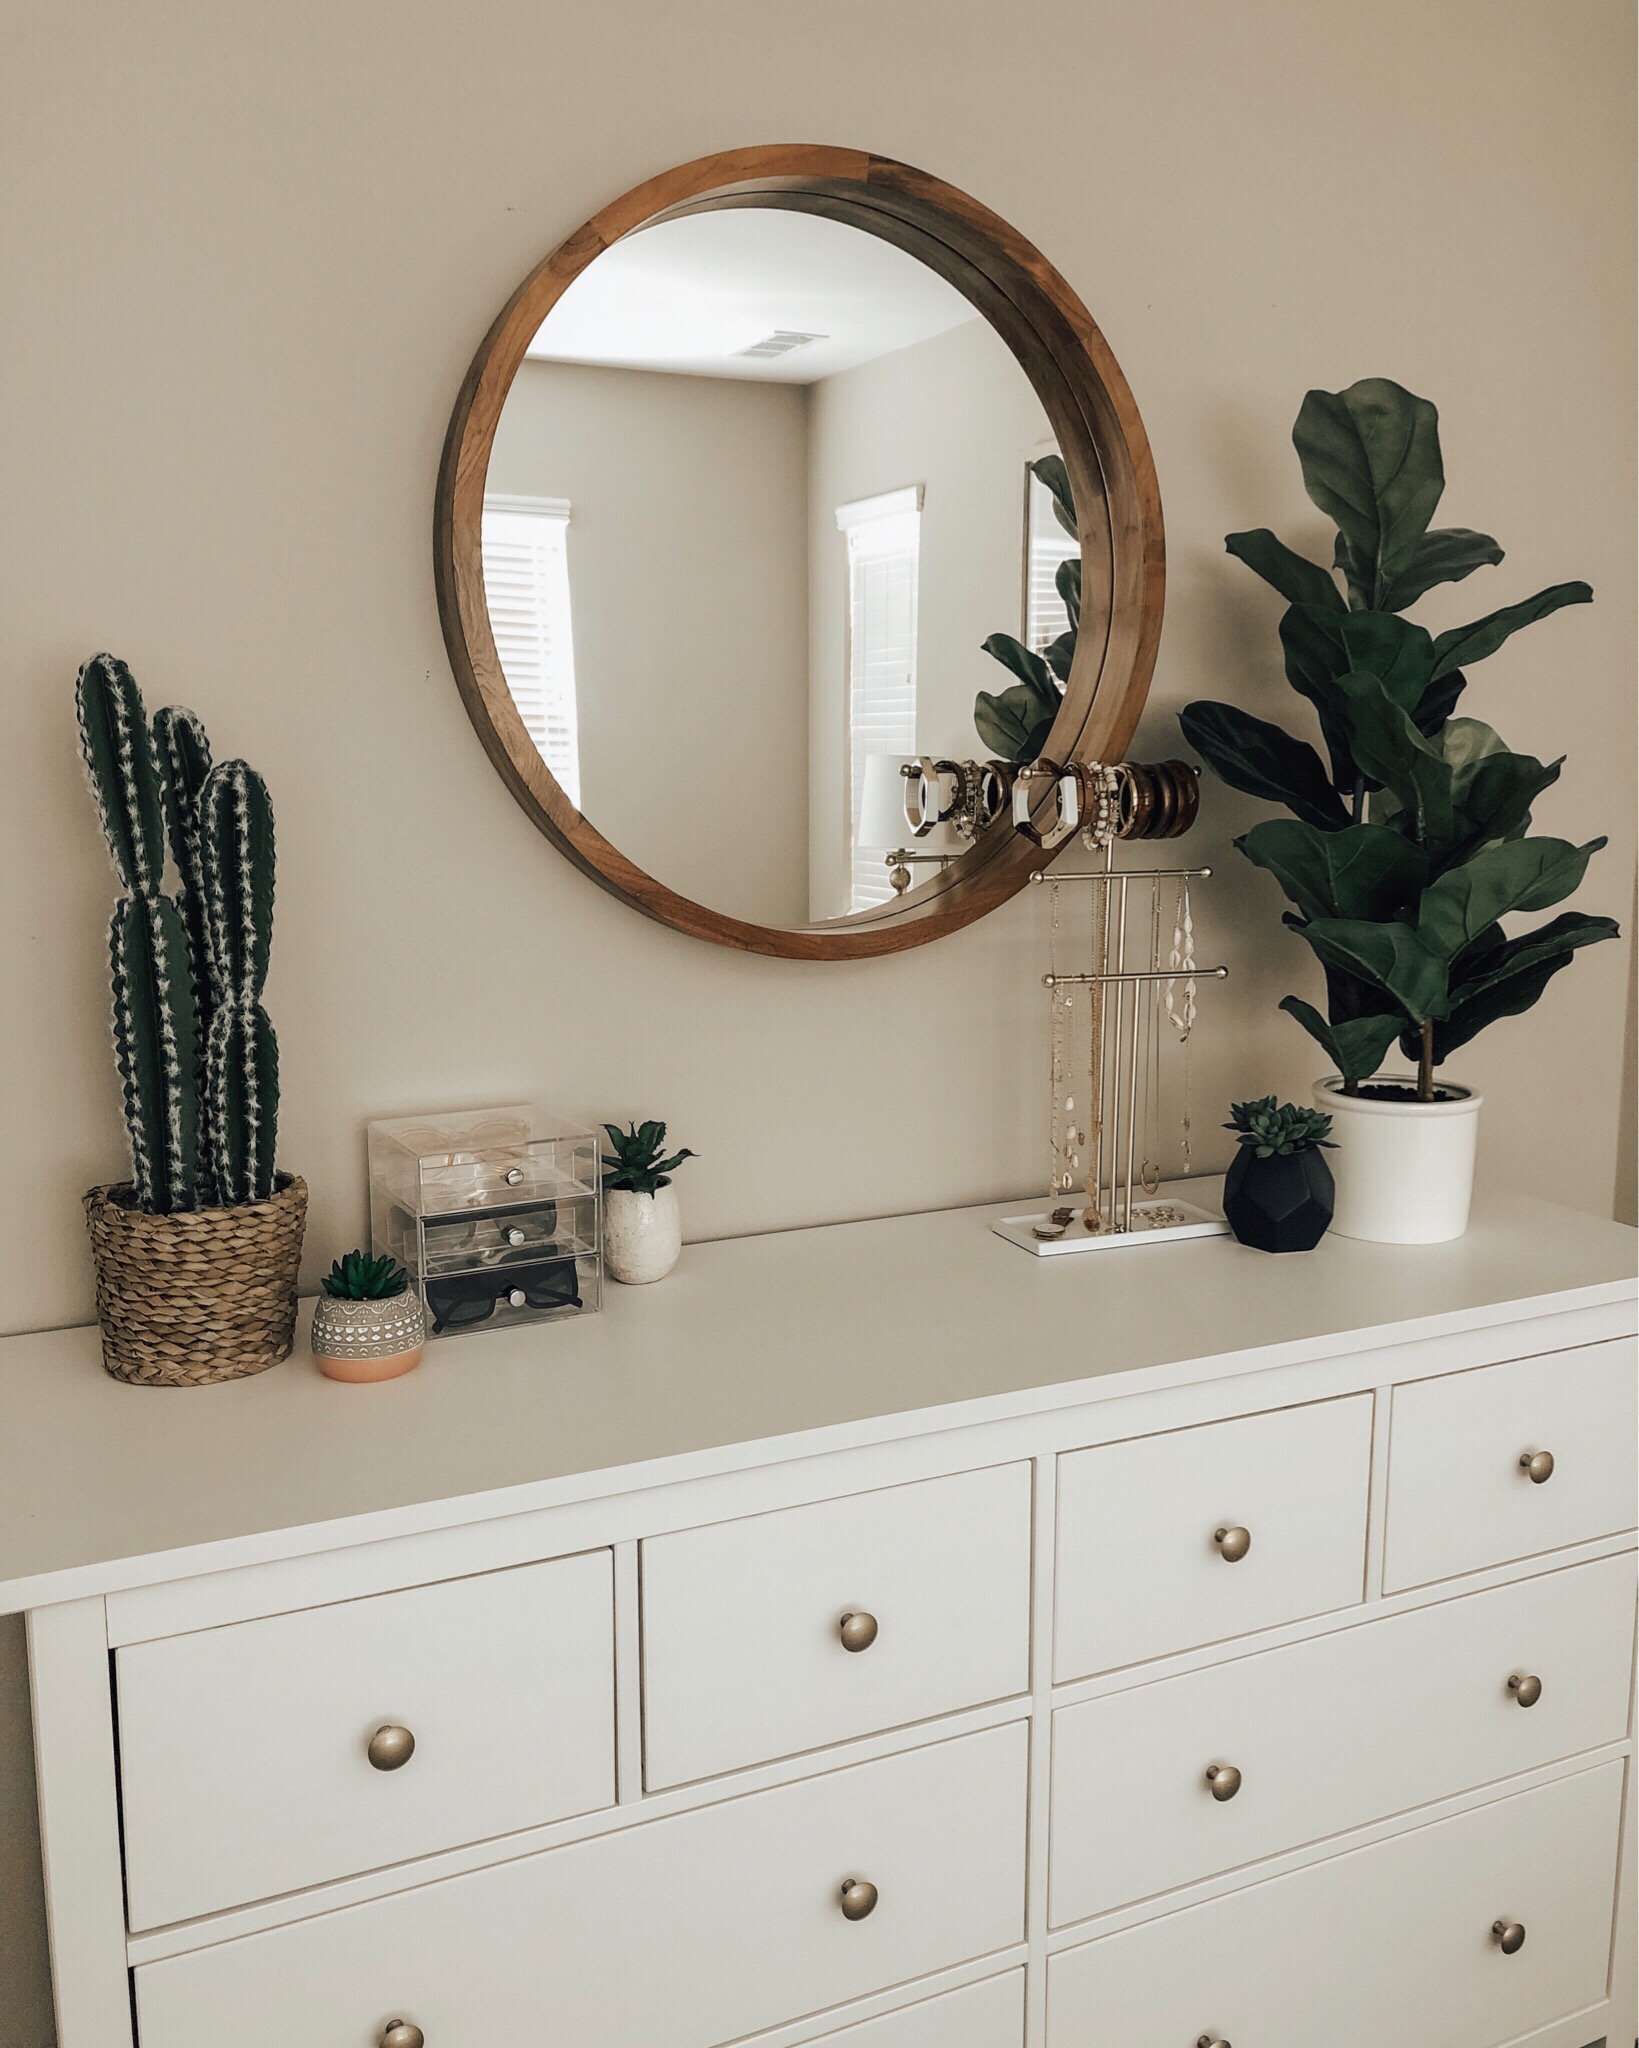 STOCK UP WITH THE 2-DAY TARGET HOME SALE- Jaclyn De Leon Style+ Need a Spring home refresh? Target is having one of their best home sales and it's time to get your home ready for a new season. Tons of faux plants, pillows, wall art, baskets, furniture and so much more